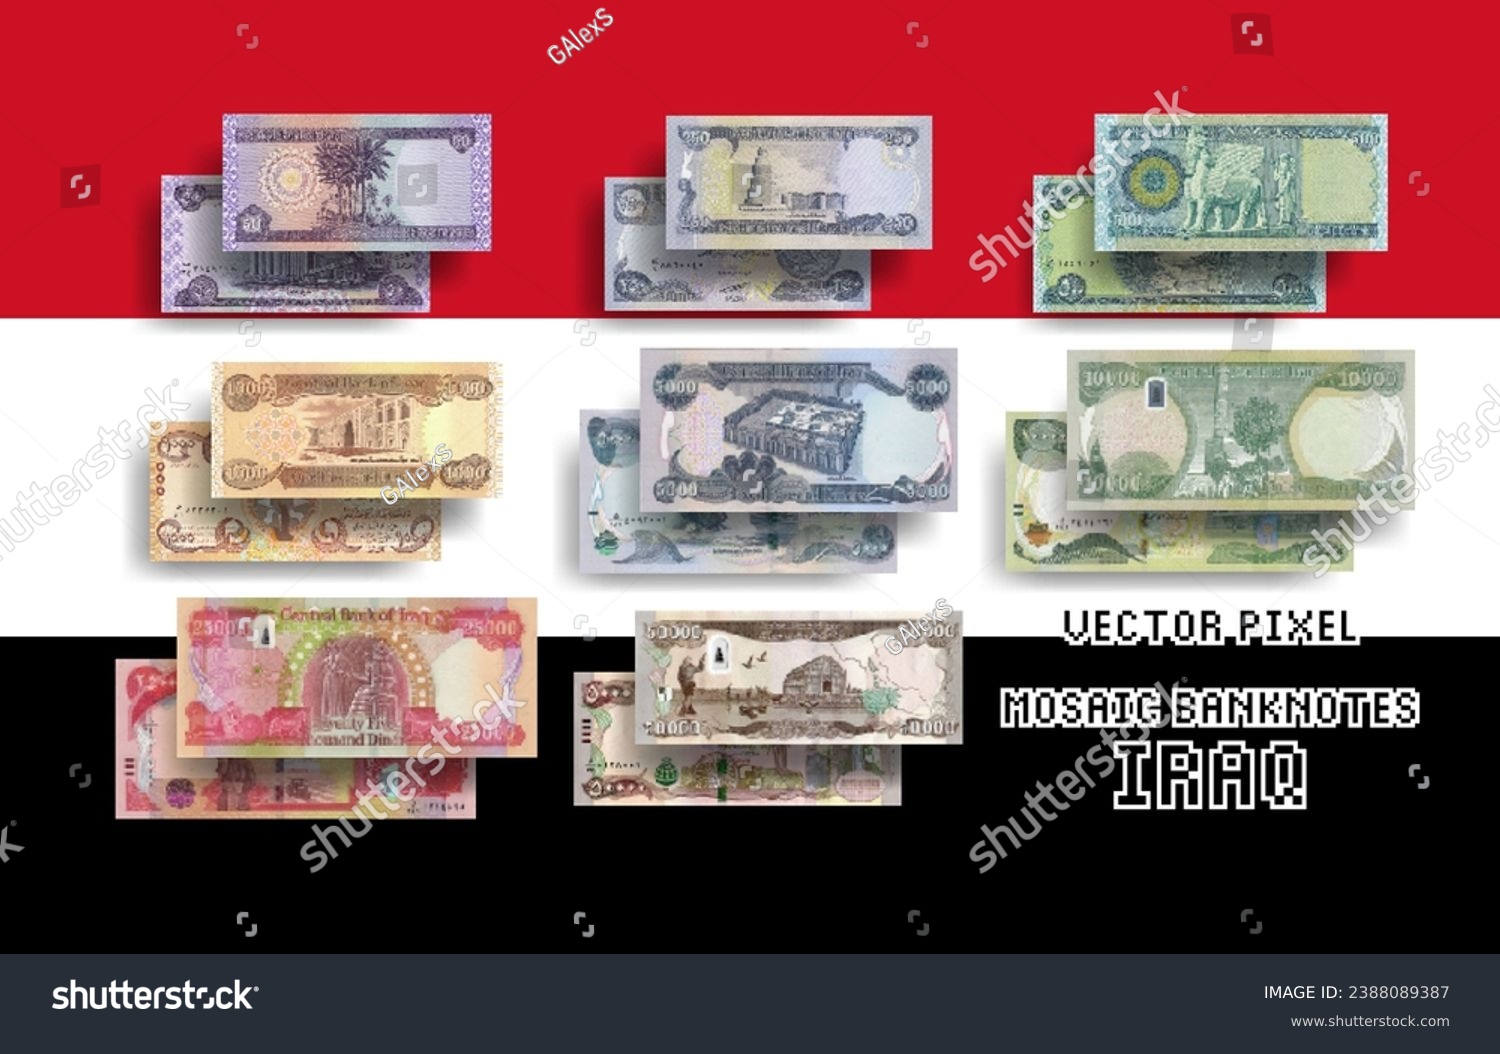 SVG of Vector set of pixel mosaic banknotes of Iraq. Collection of bills in denominations of 50, 250, 500, 1000, 5000, 10000, 25000 and 50000 Iraqi dinars. Play money or flyers. svg